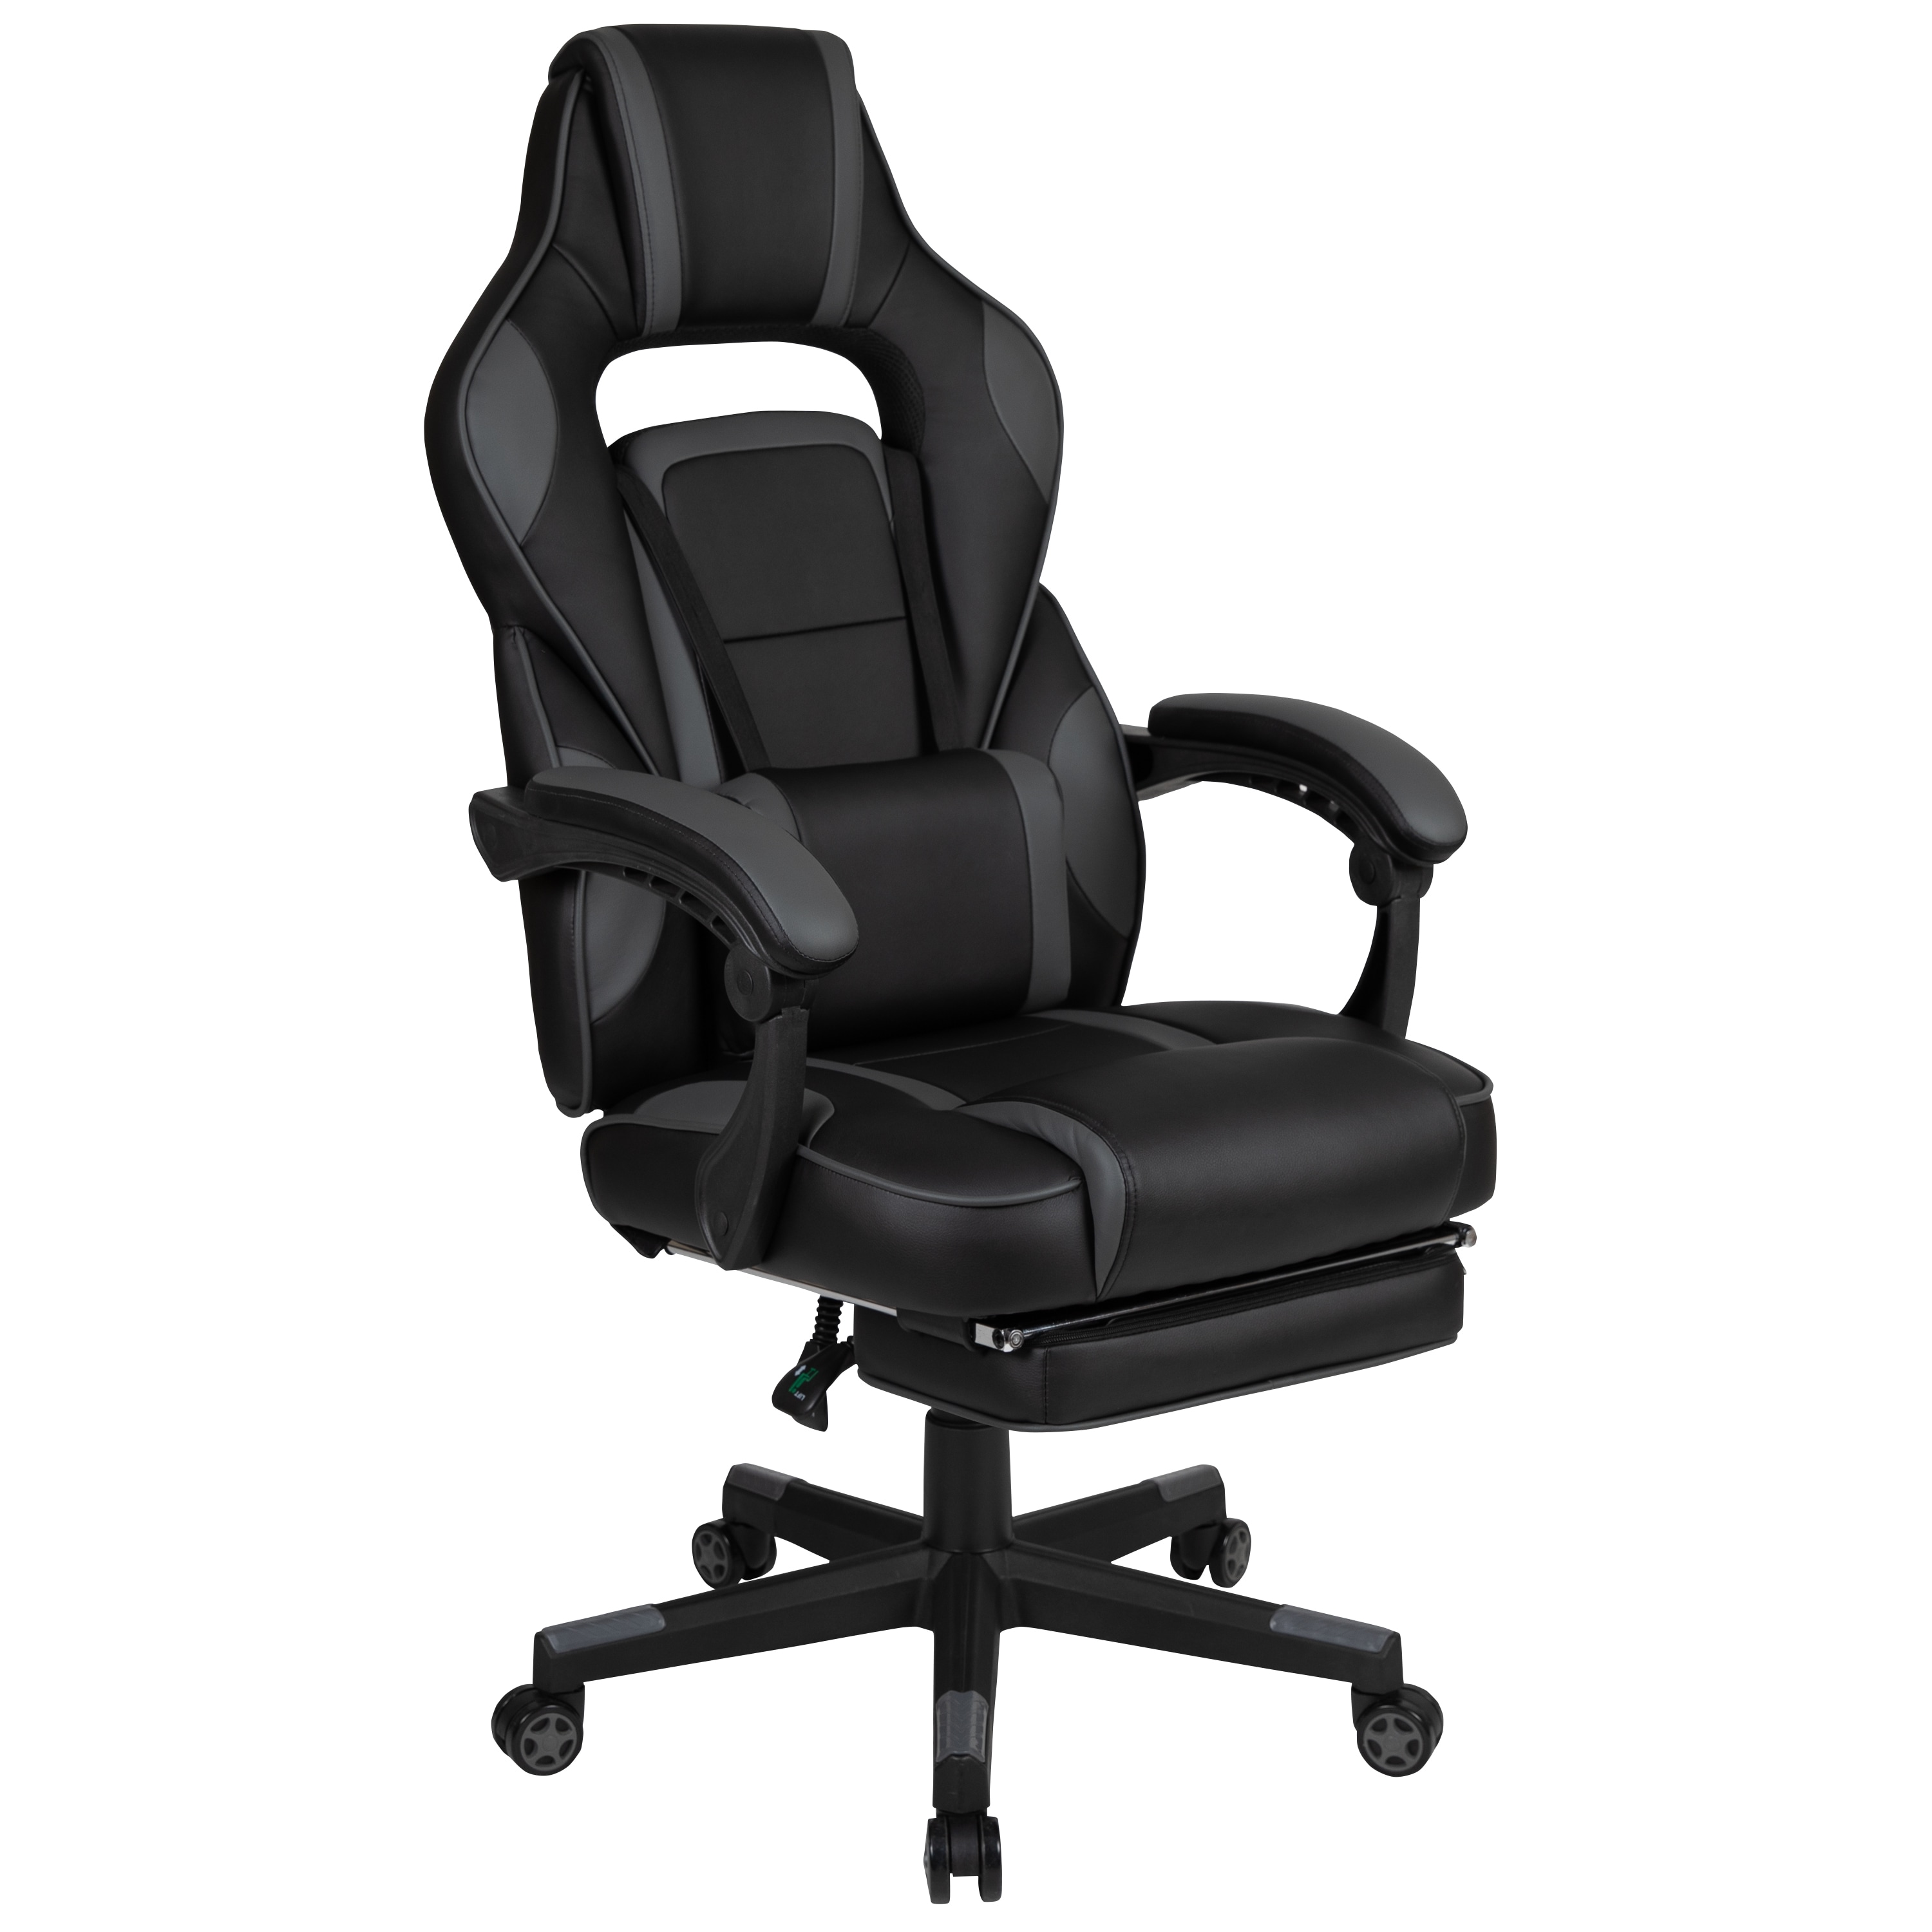 Hanover Black and White Faux Leather Gaming Chair with Adjustable